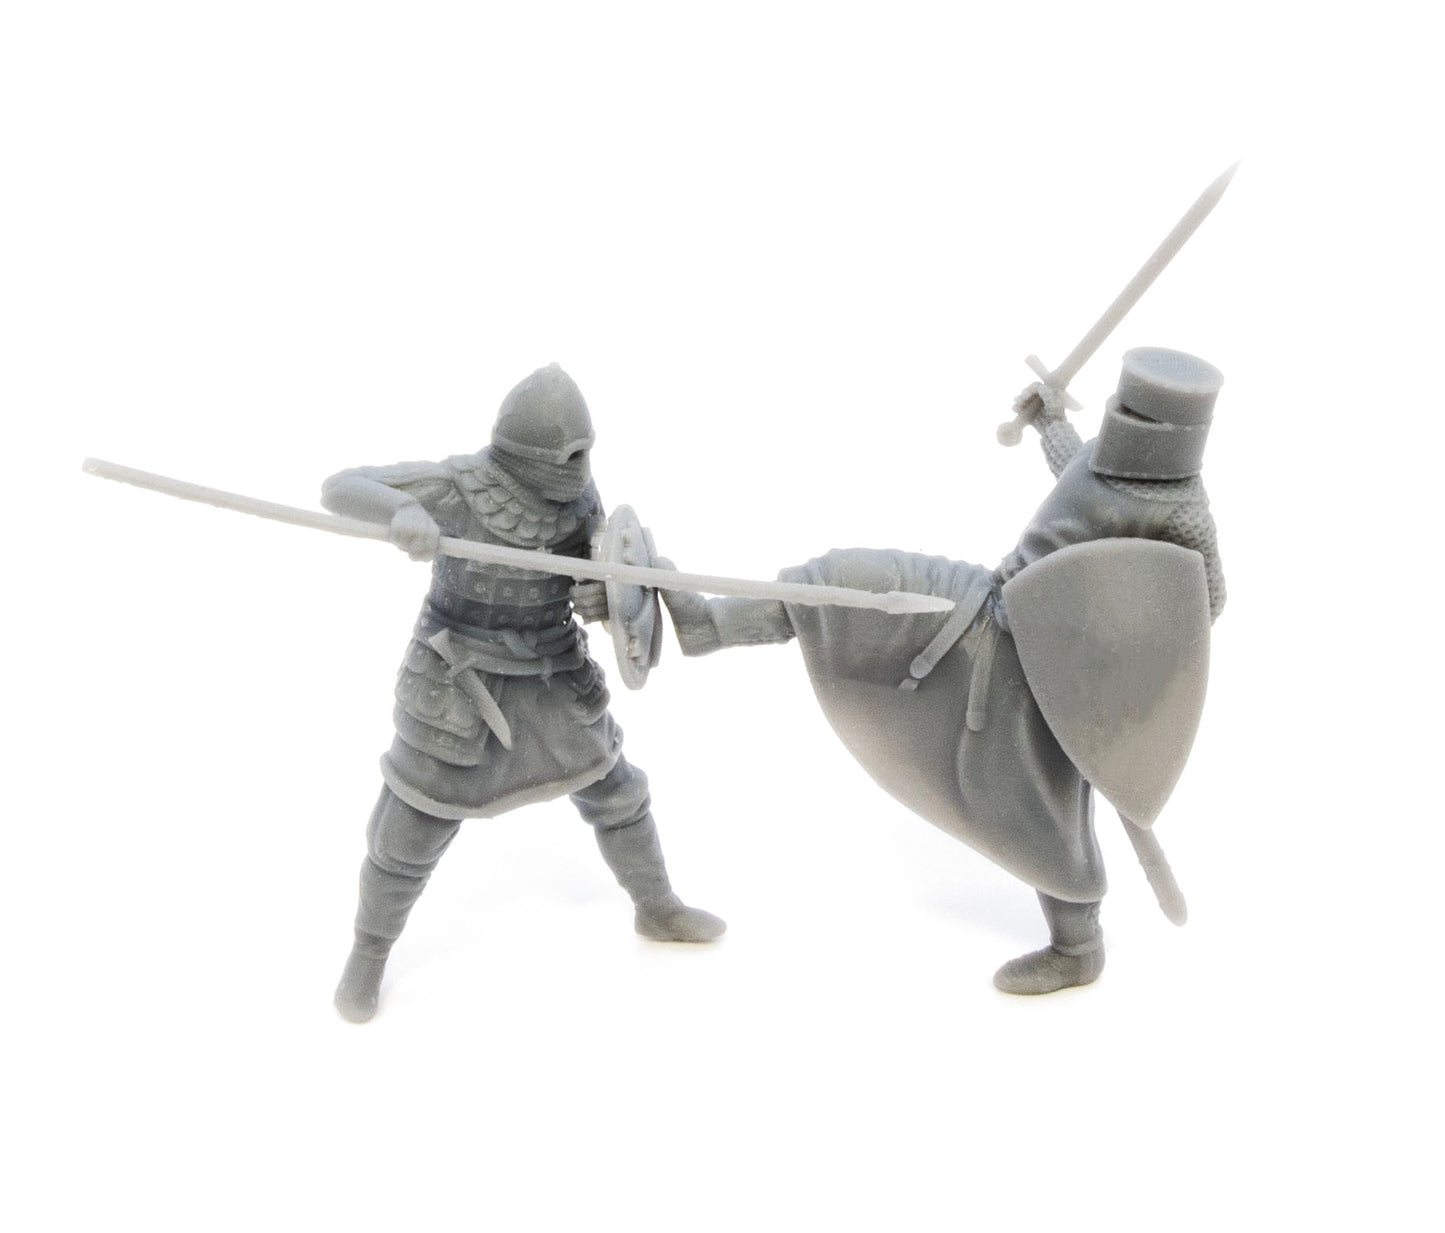 "The duel" small crusader battle